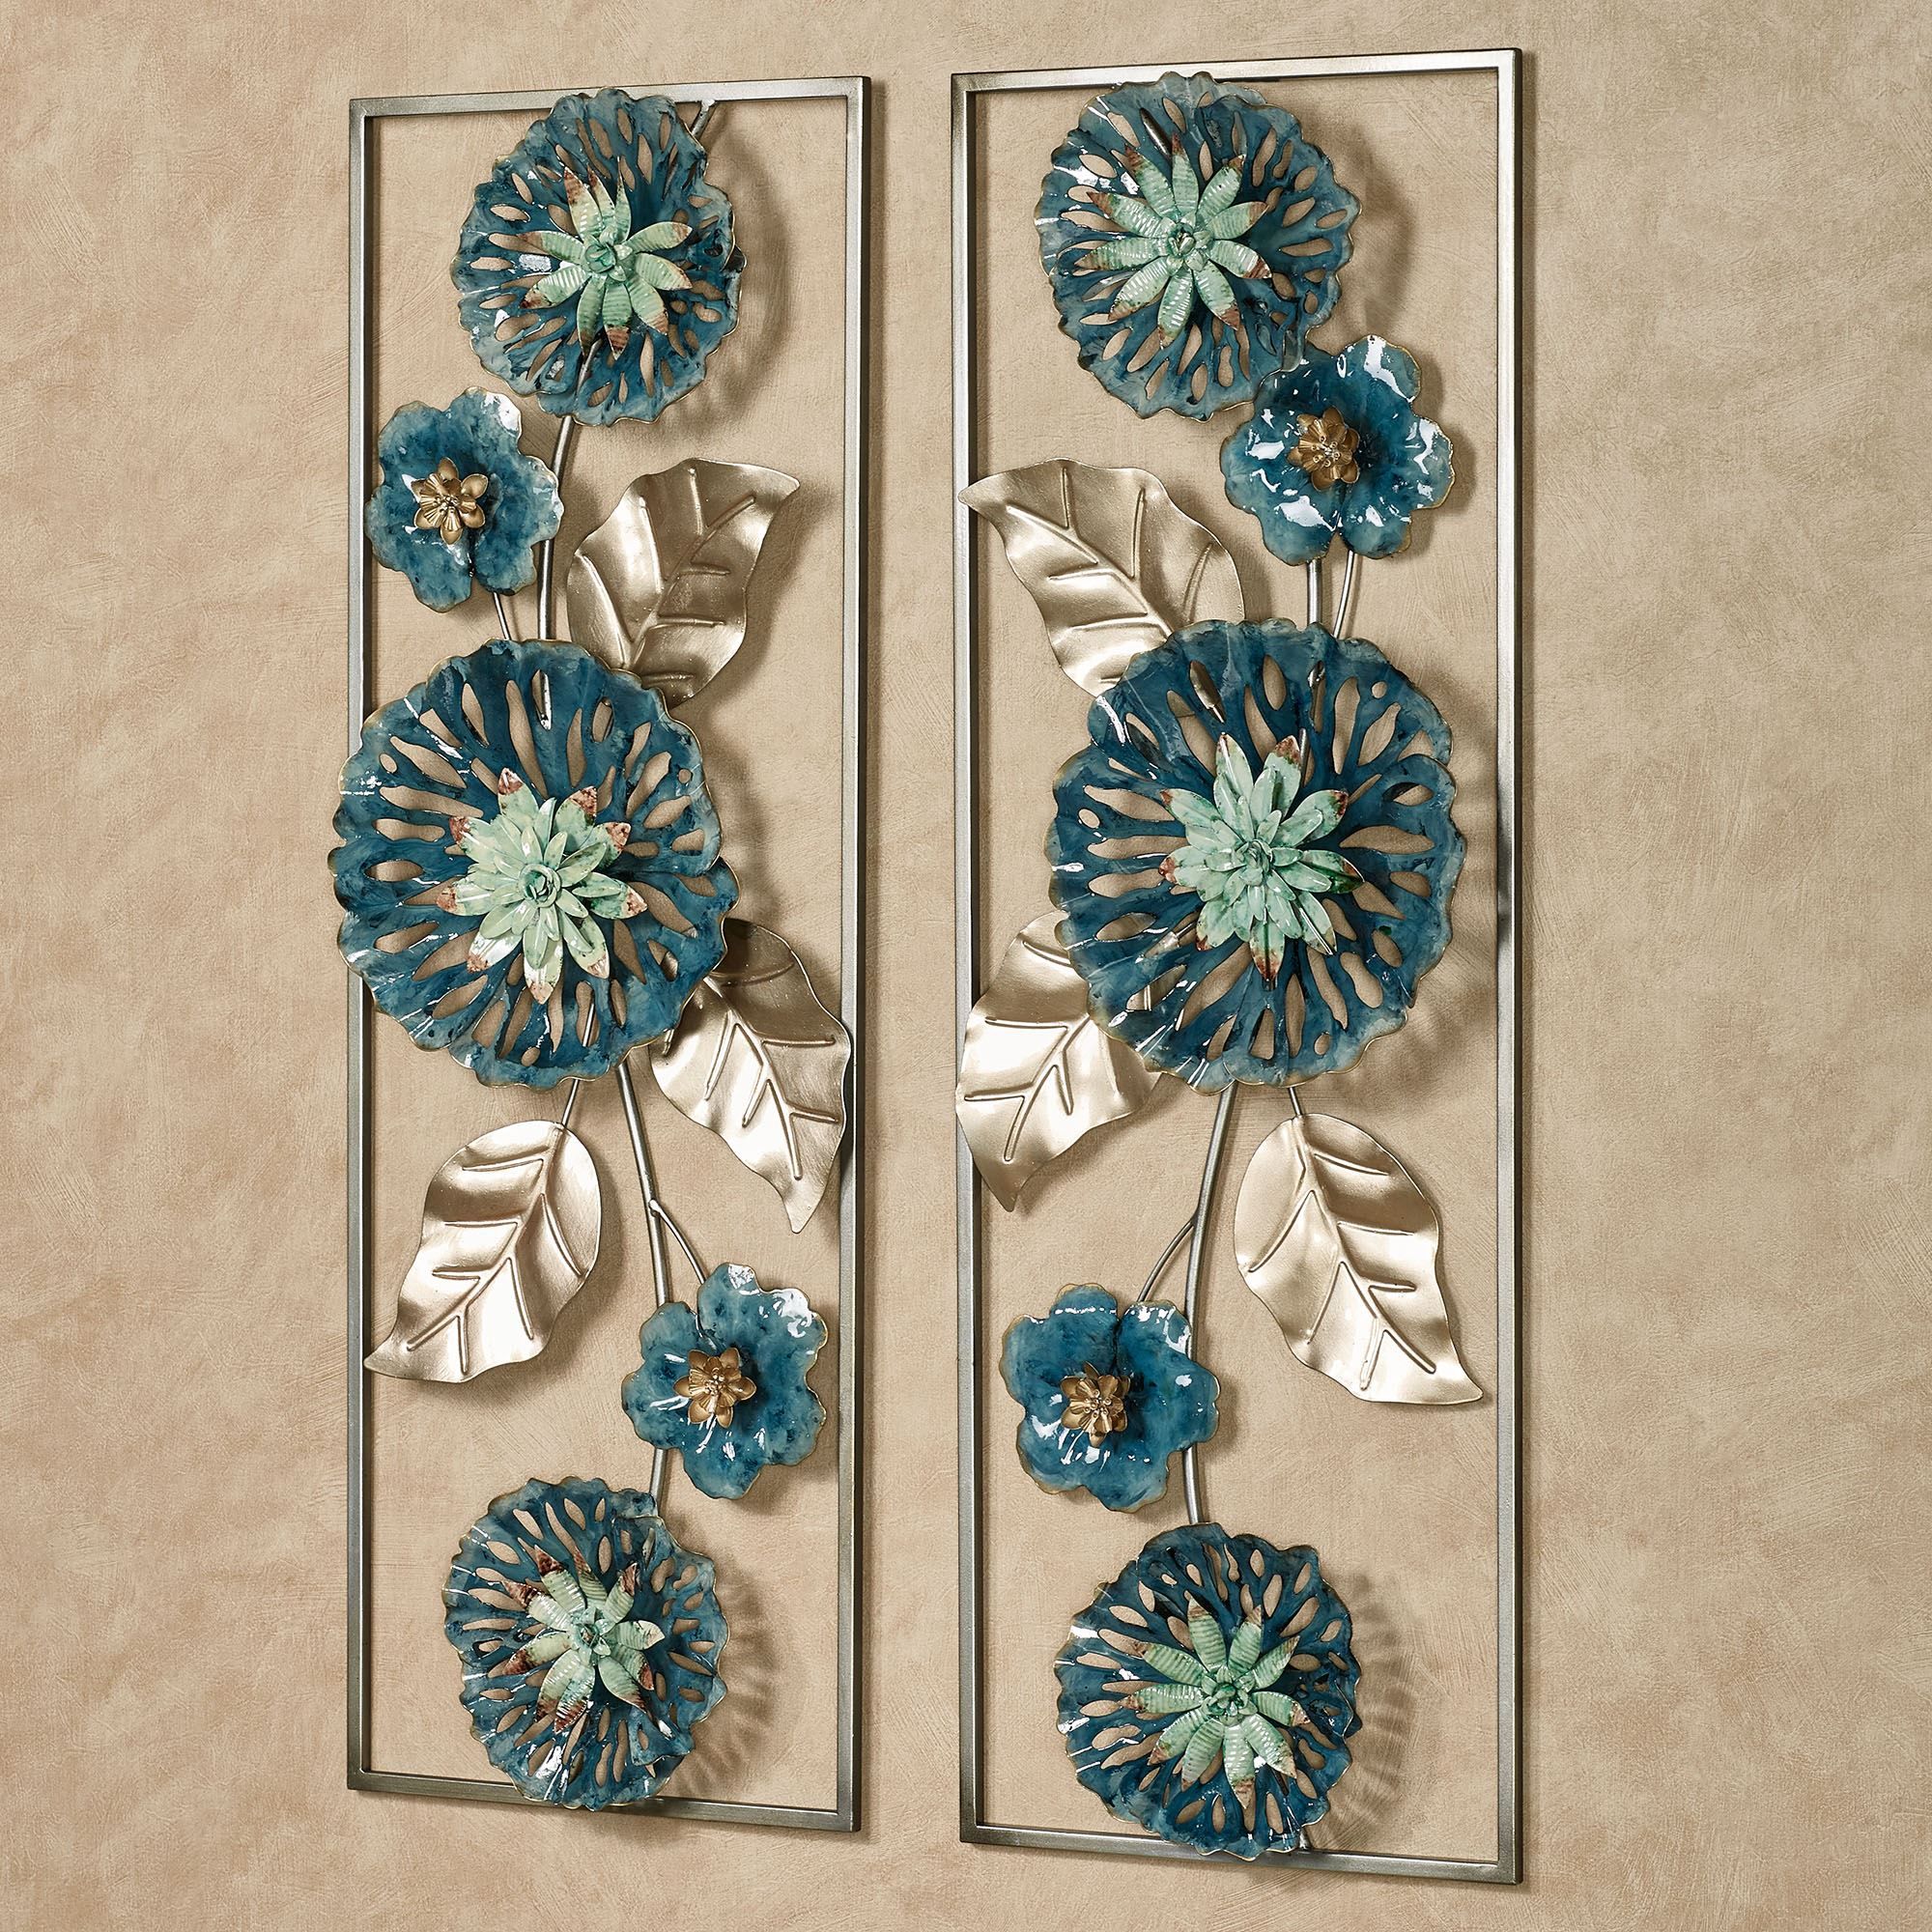 Anabelle Dark Blue Floral Metal Wall Art Set Inside Most Current Crestview Bloom Wall Art (View 5 of 20)